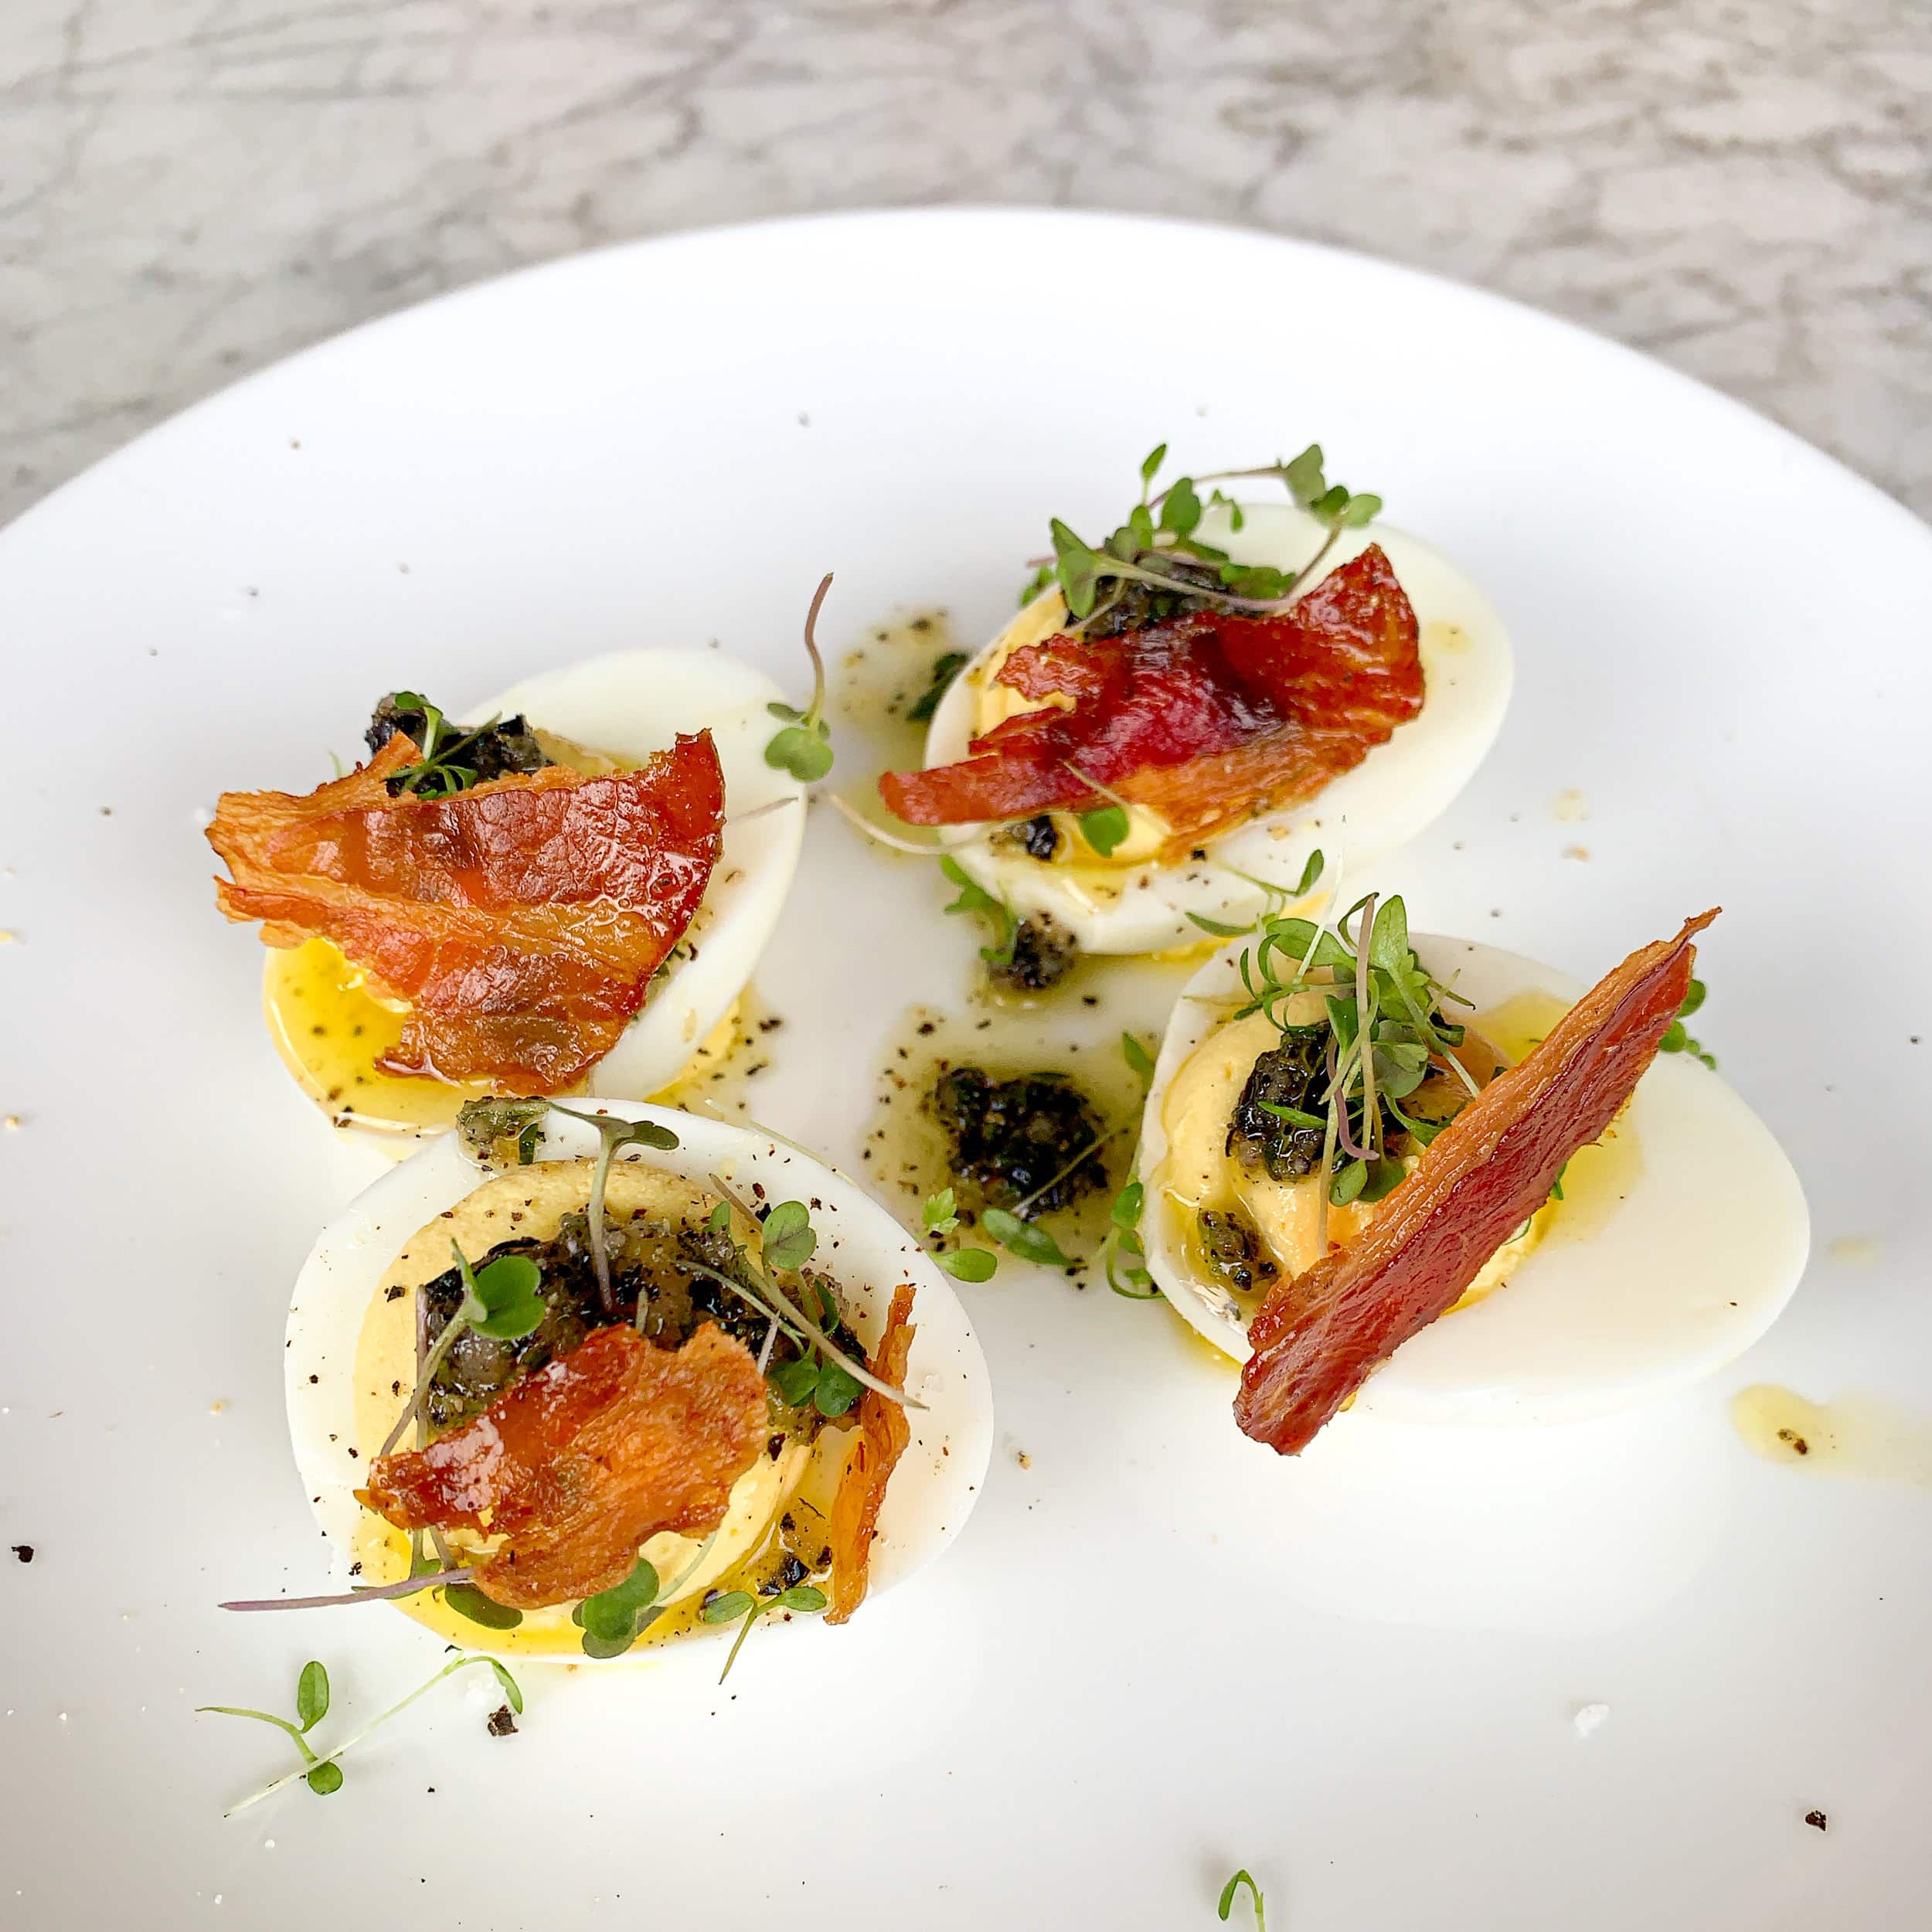 Deviled eggs with black truffle, crispy pancetta, and baby celery at Launderette in East Austin